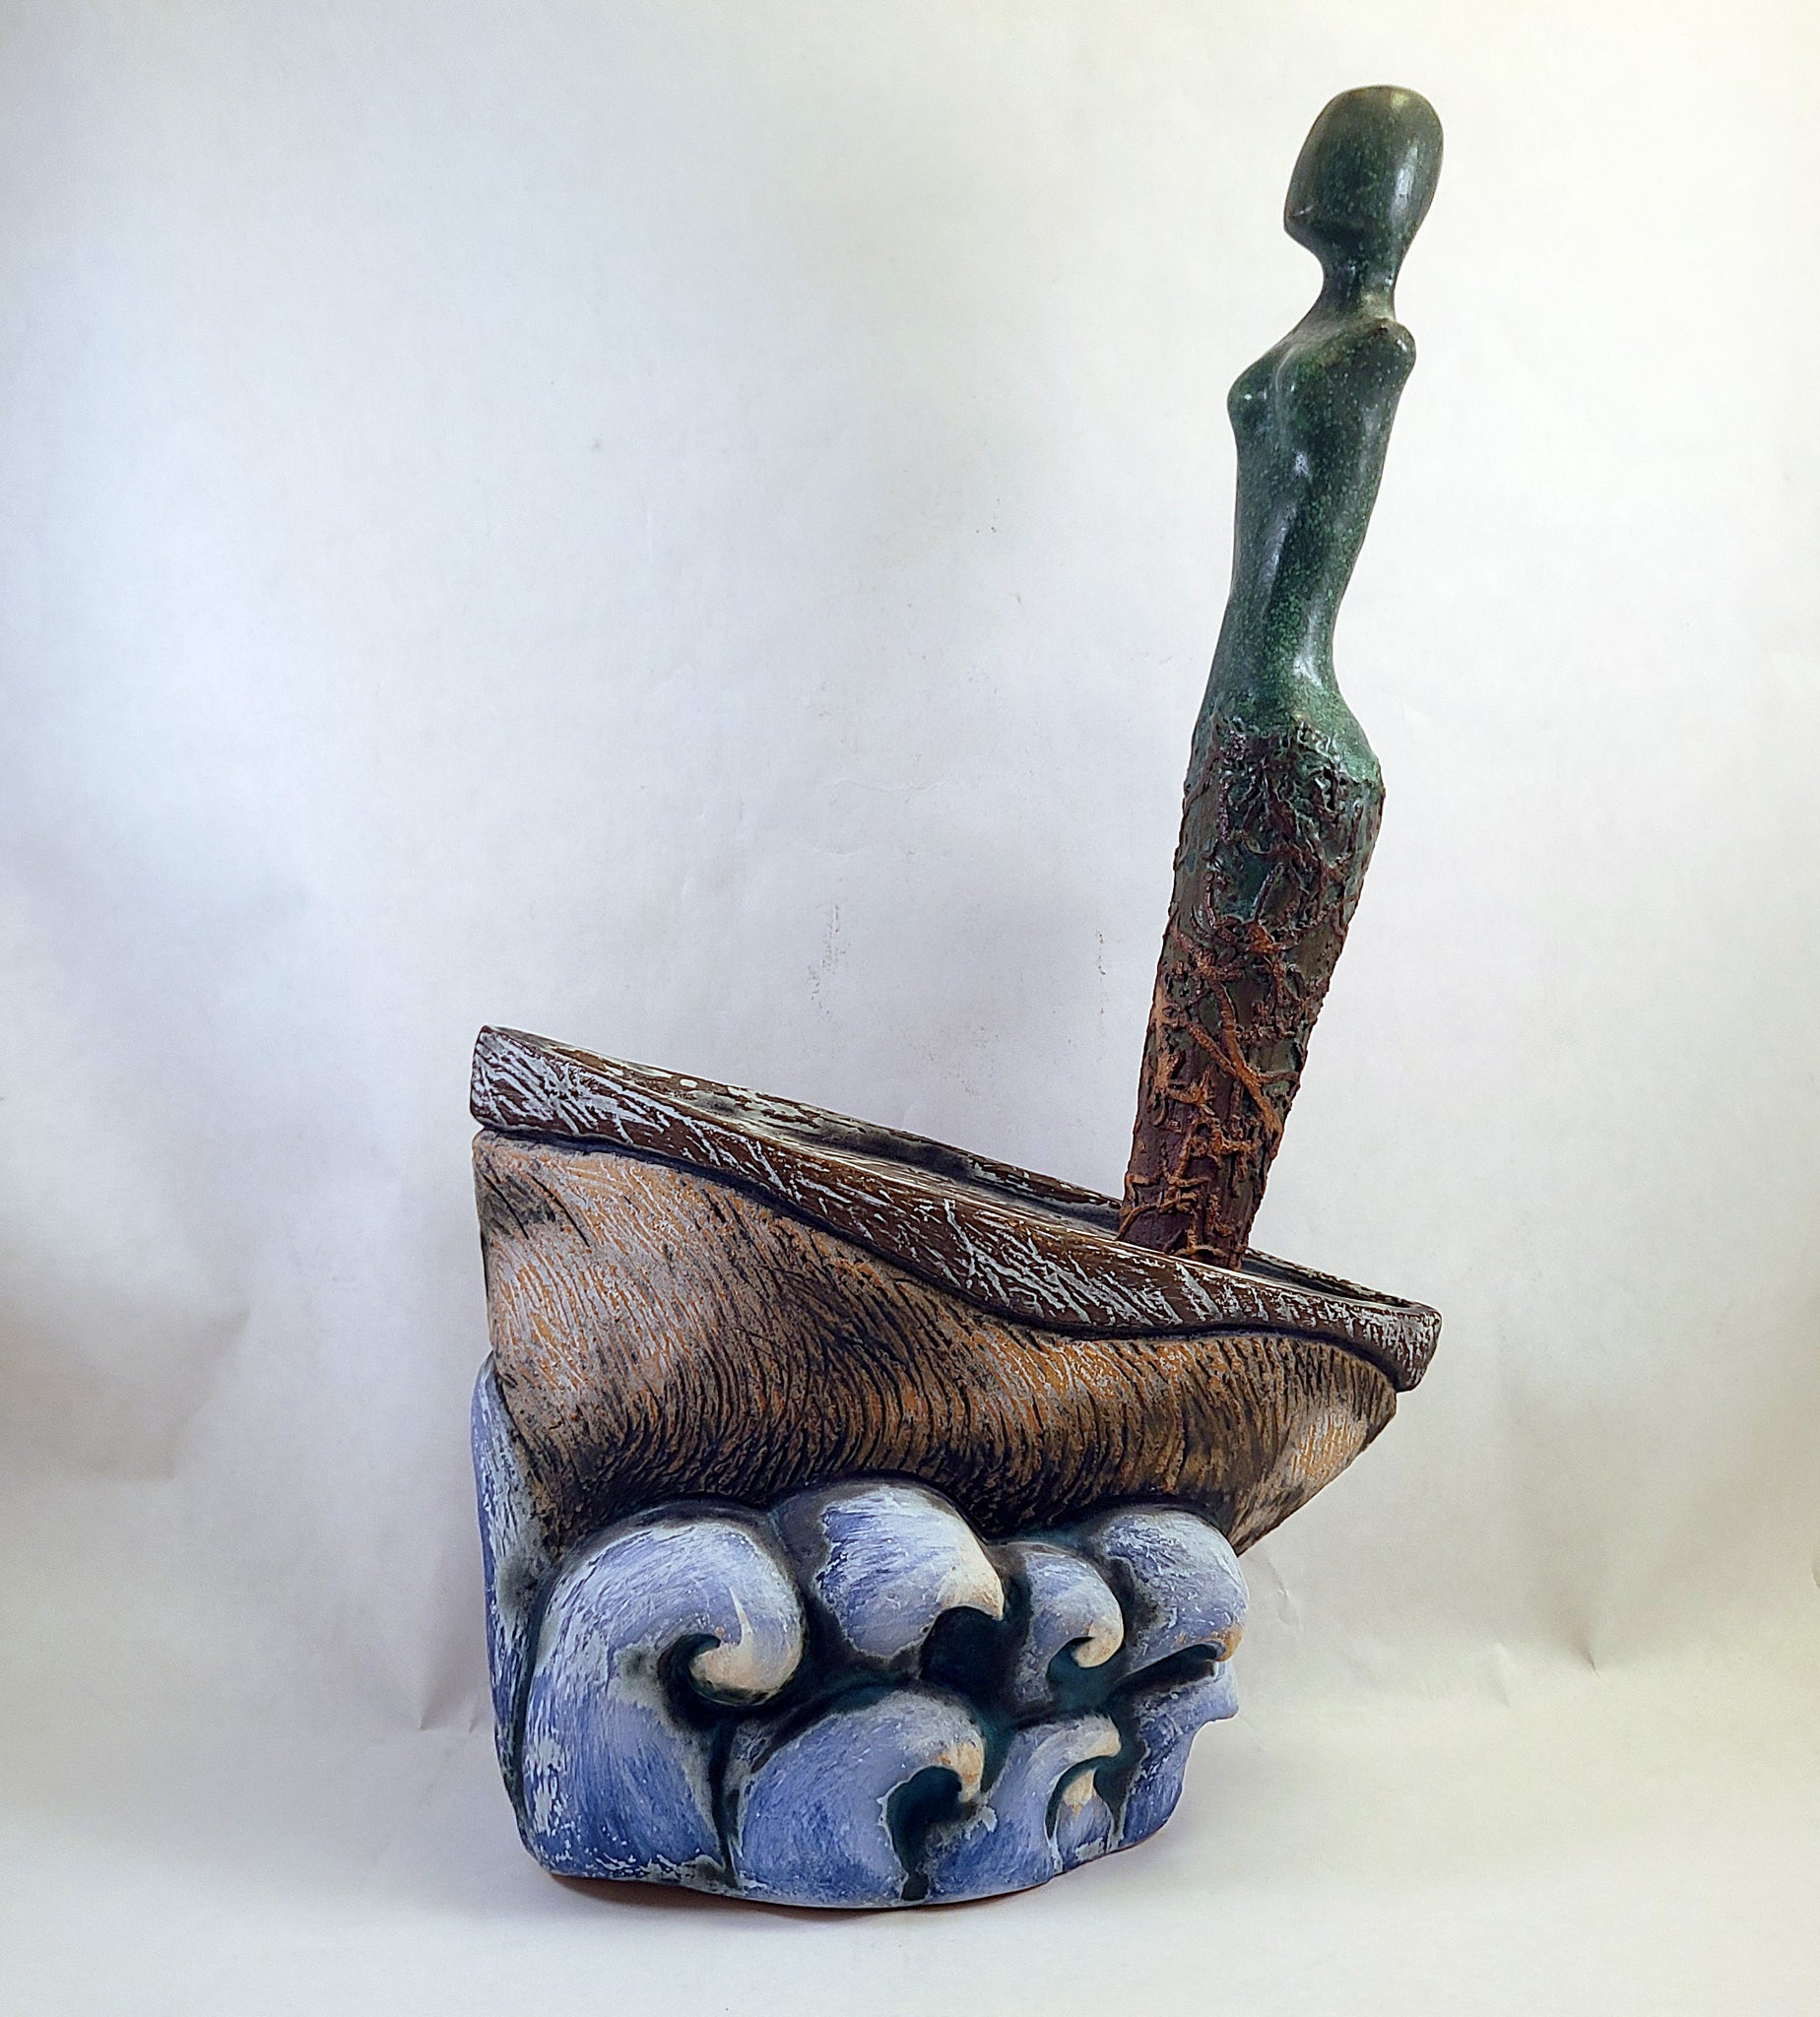 Broski - Sculpture - Boat on Waves - 'Liberate Your Fears/Take the Journey'